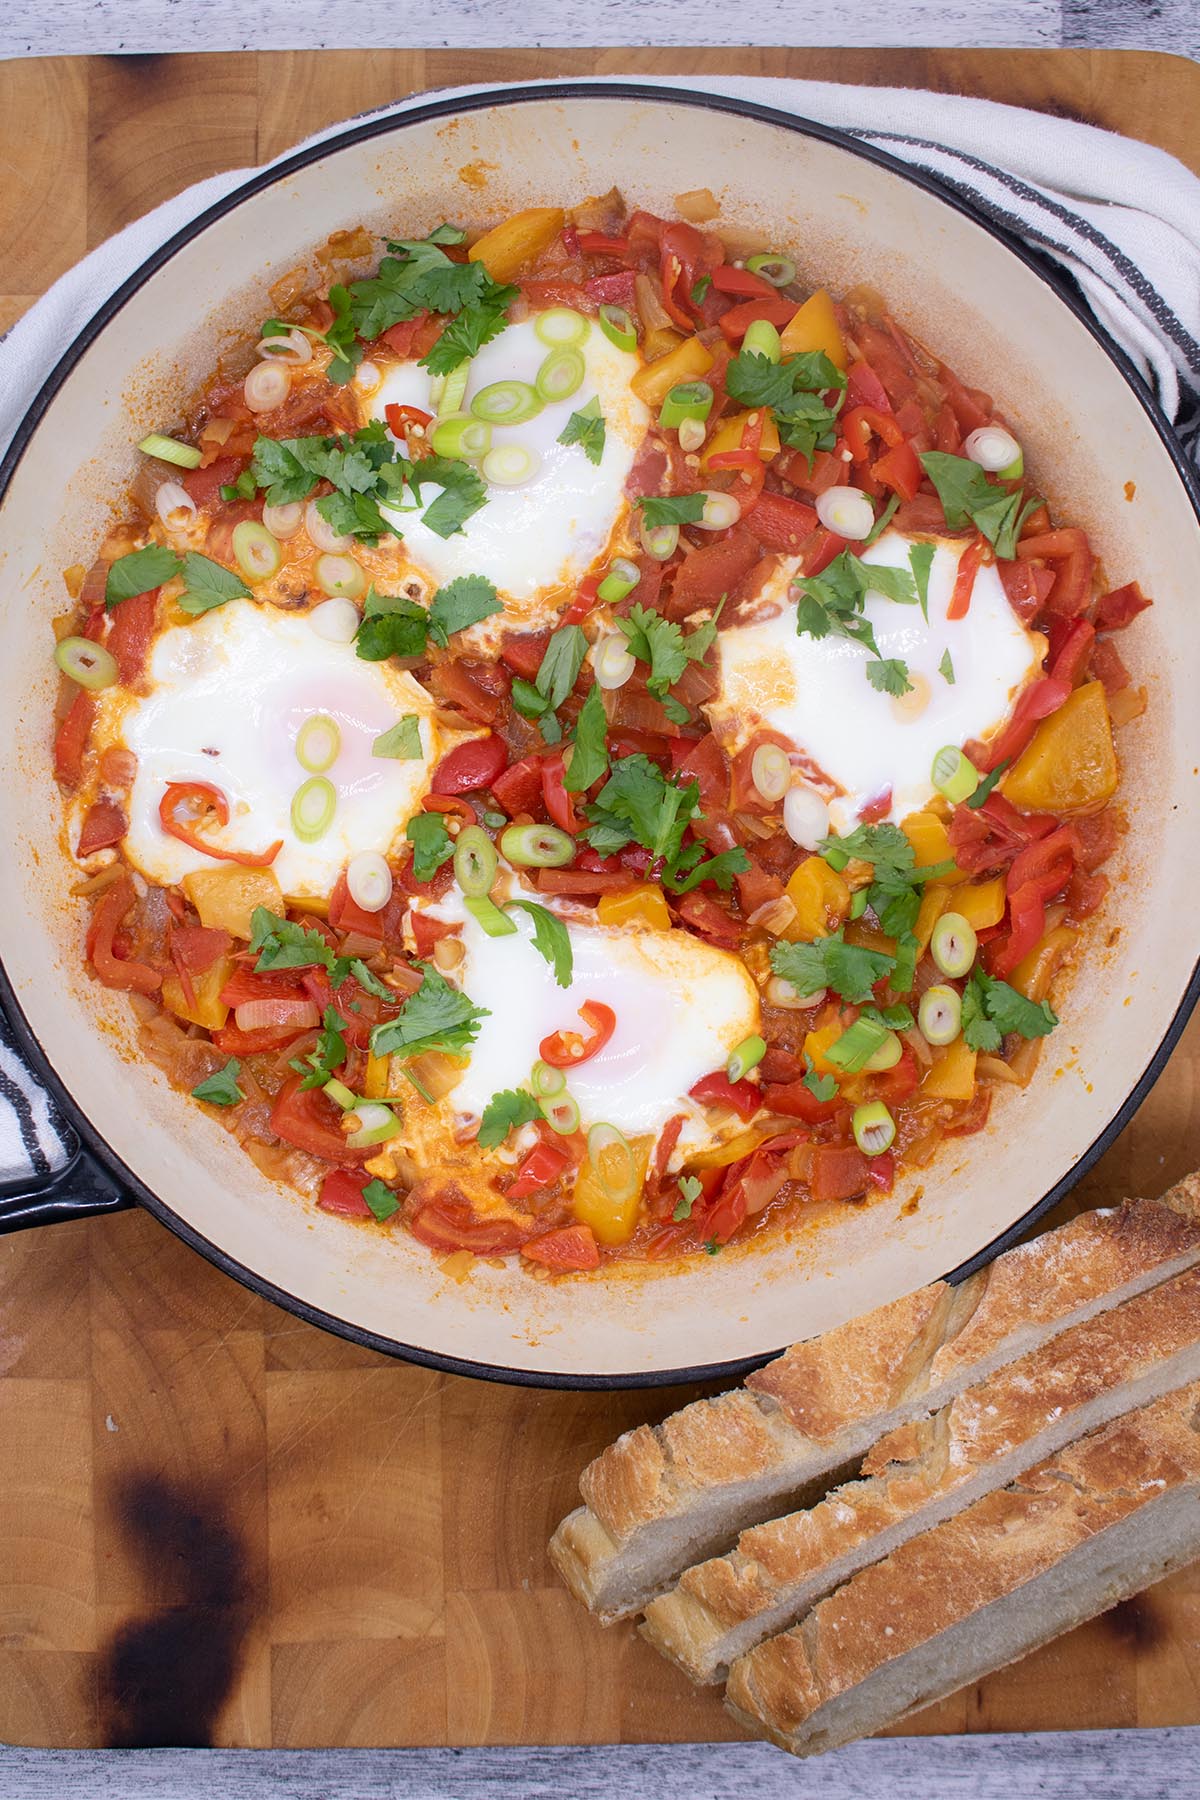 Eggs in a tomato and pepper sauce in a large round casserole with bread at the side